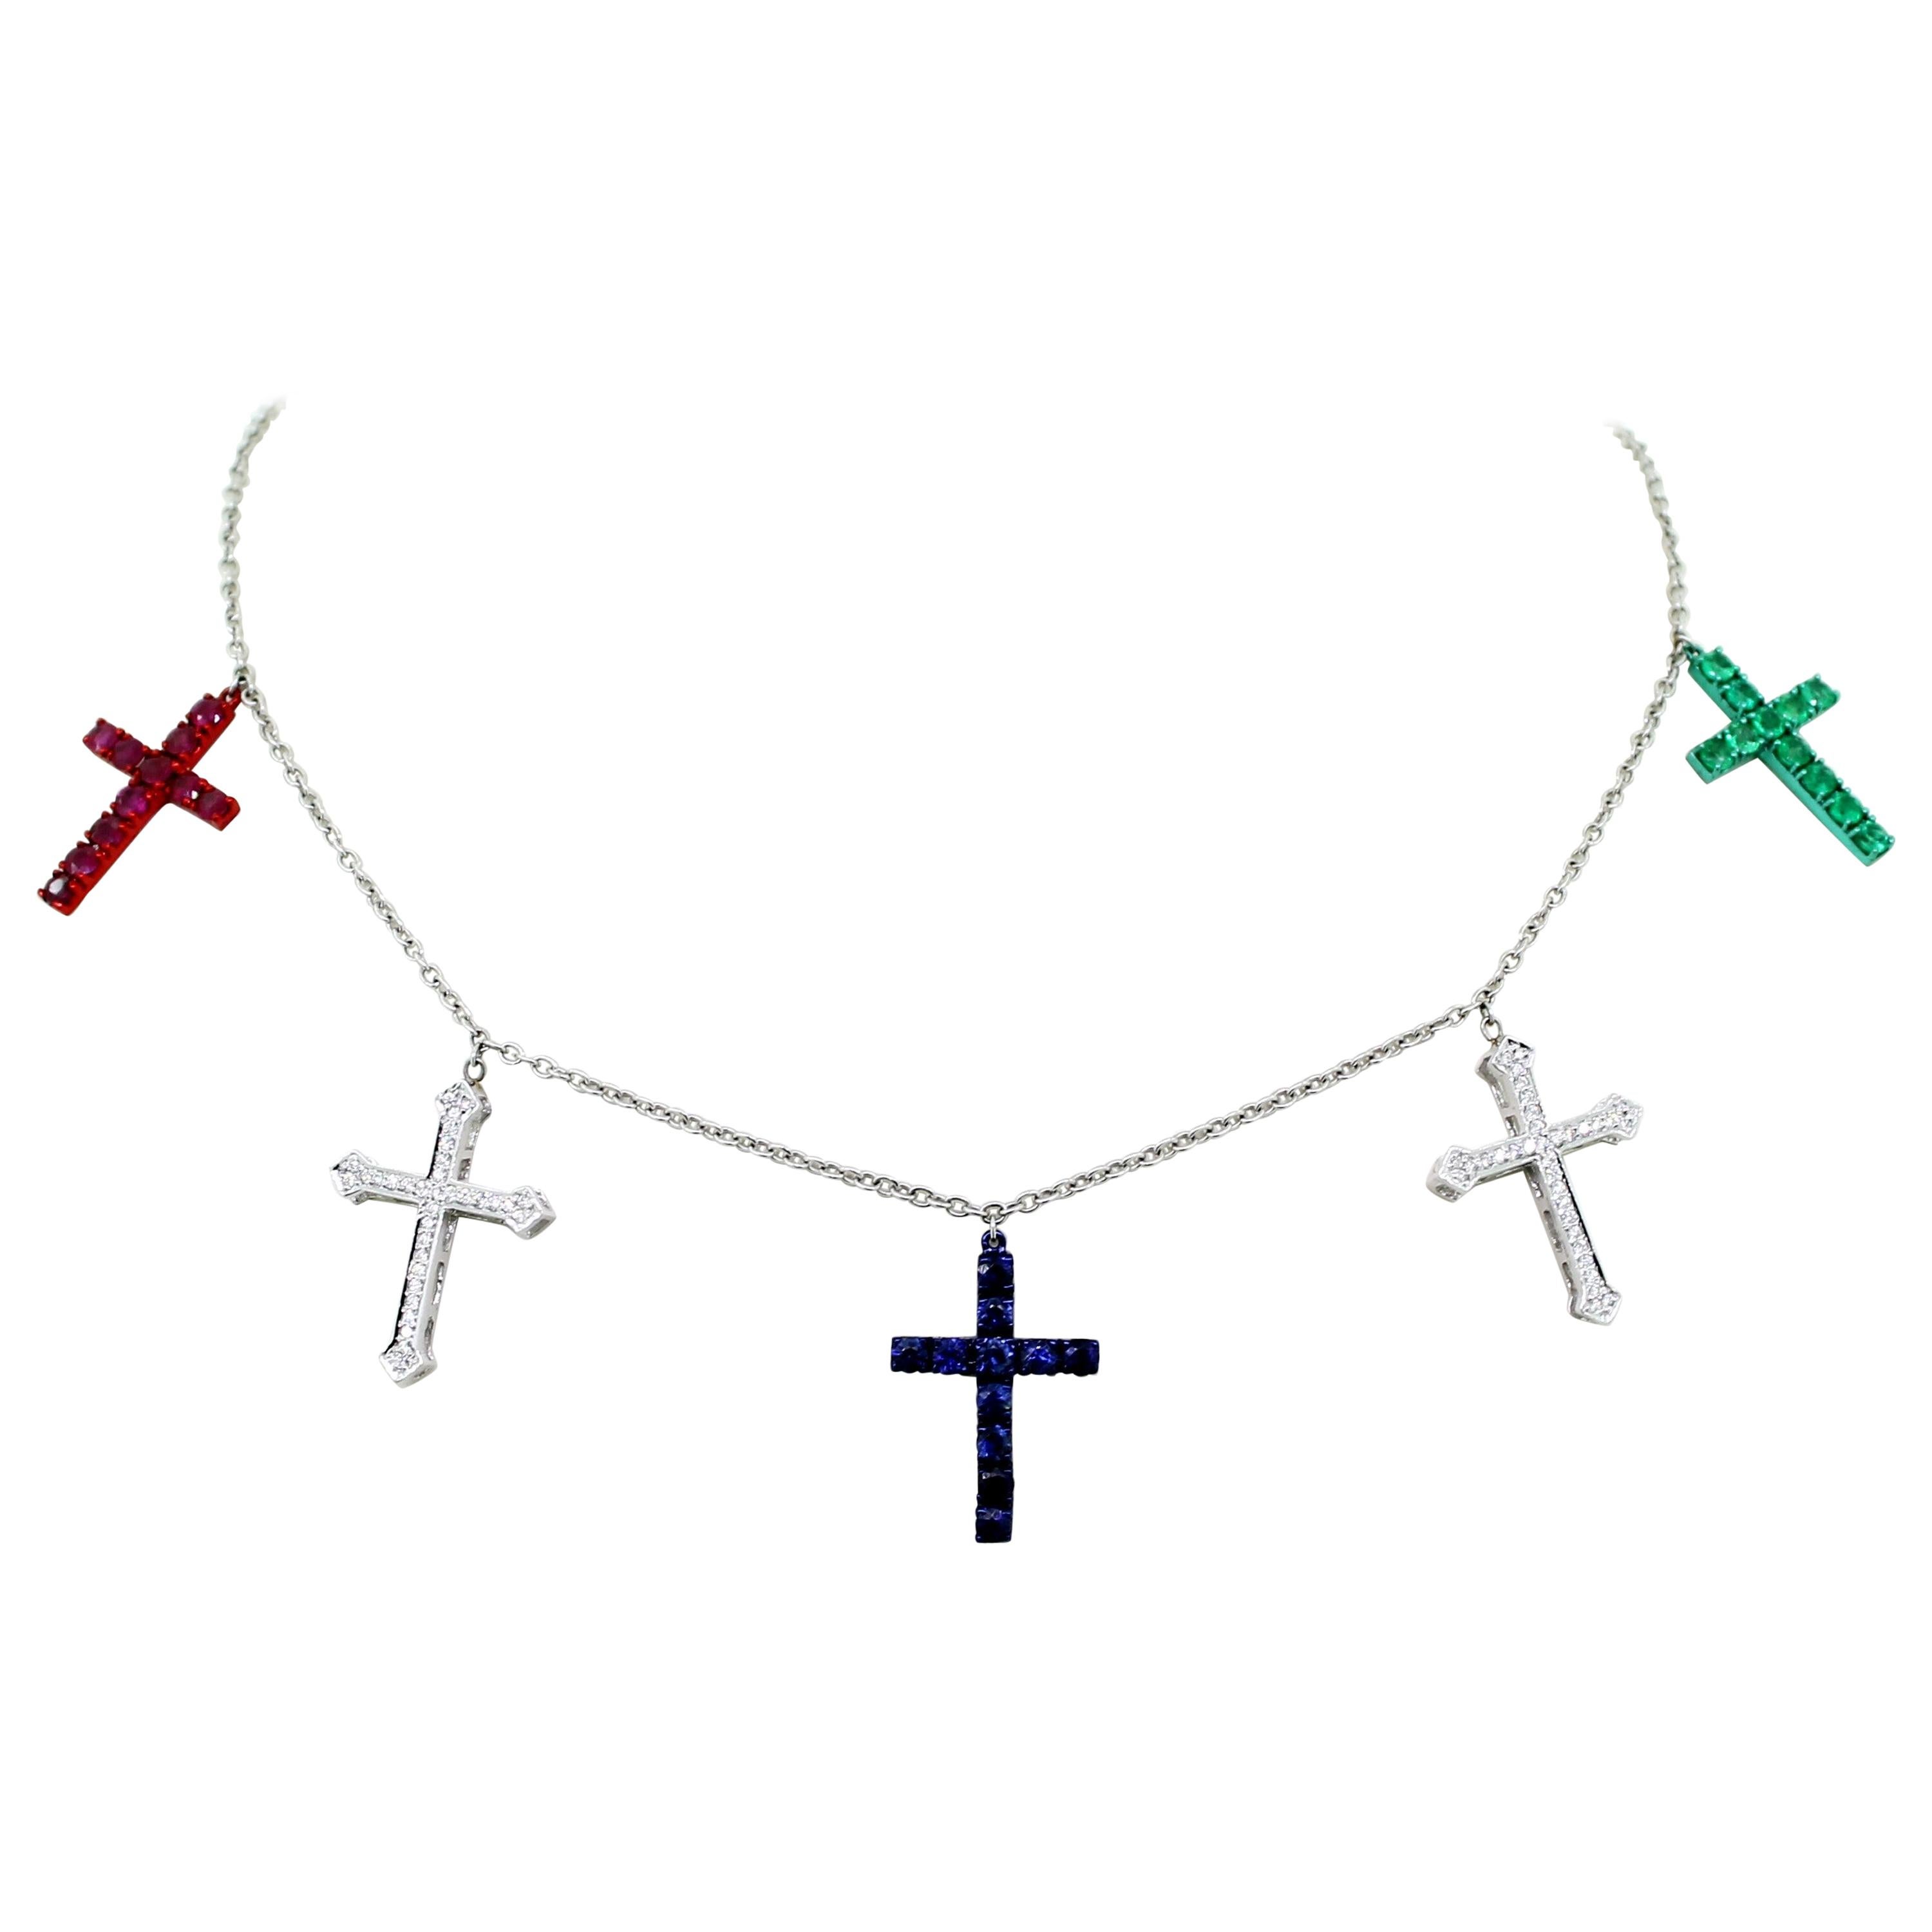 Diamonds, Emerald, Ruby and Sapphire Crosses Charms Necklace